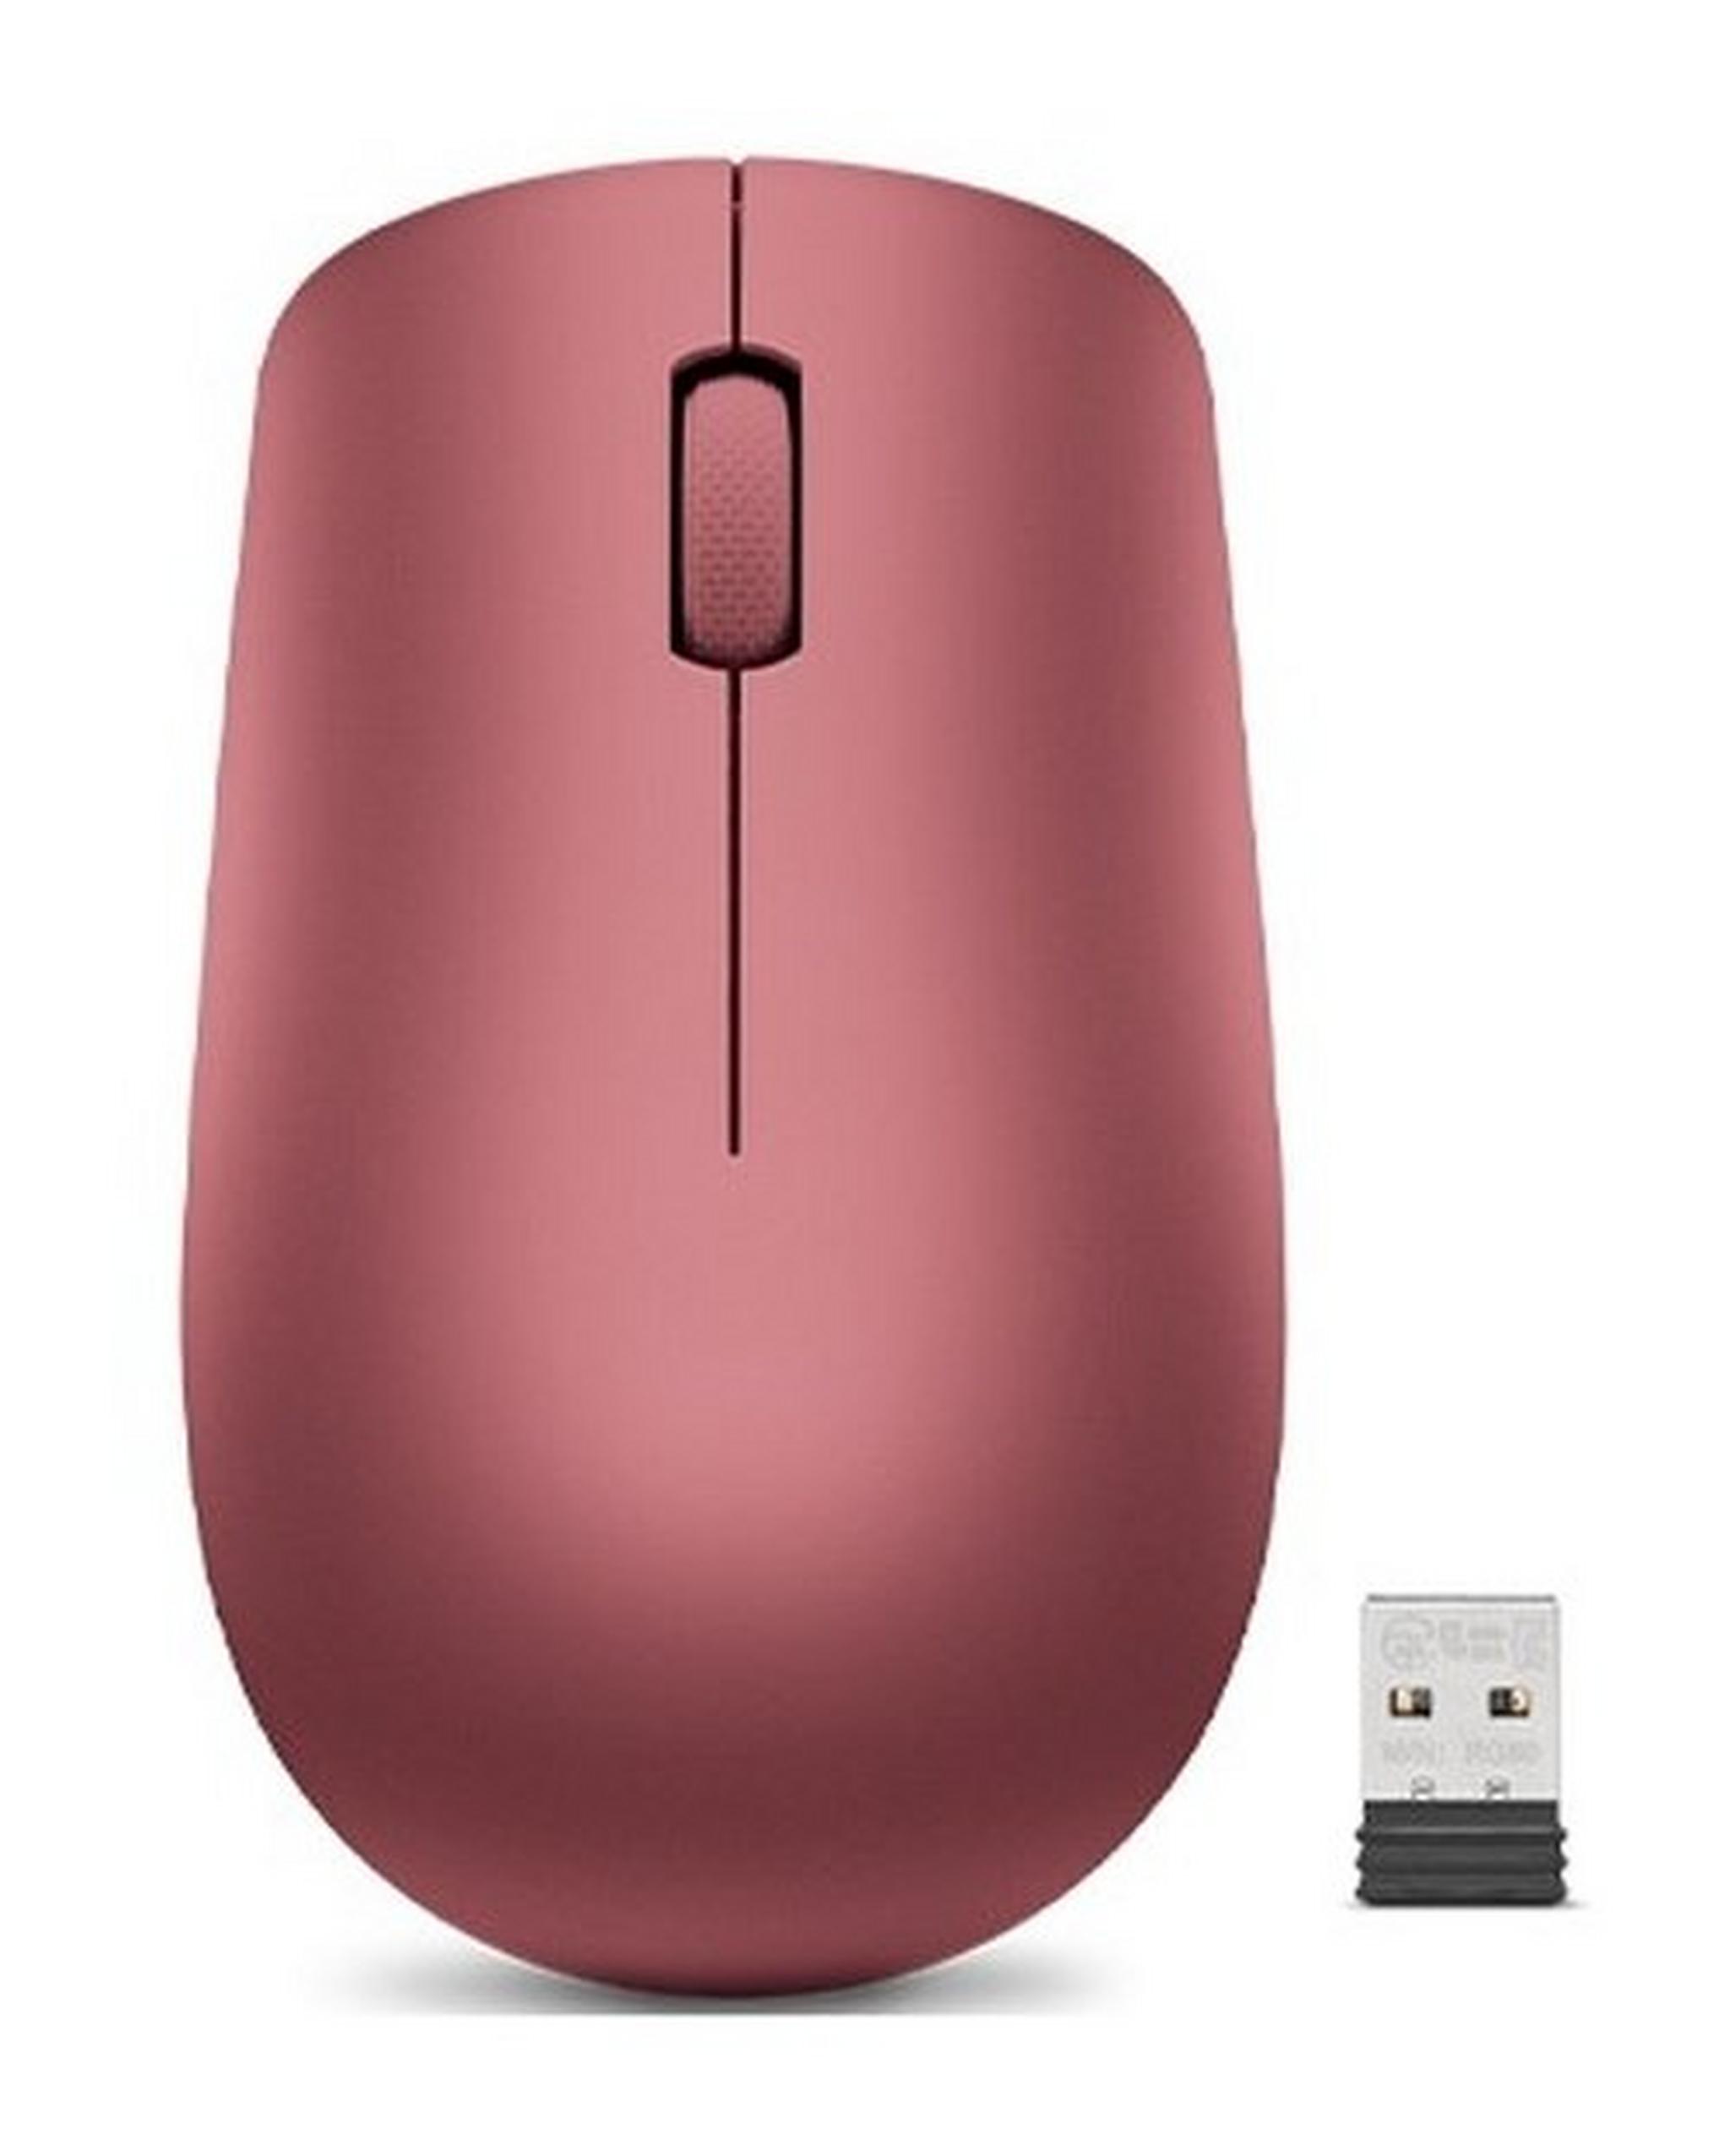 Lenovo 530 Wireless Mouse - Red